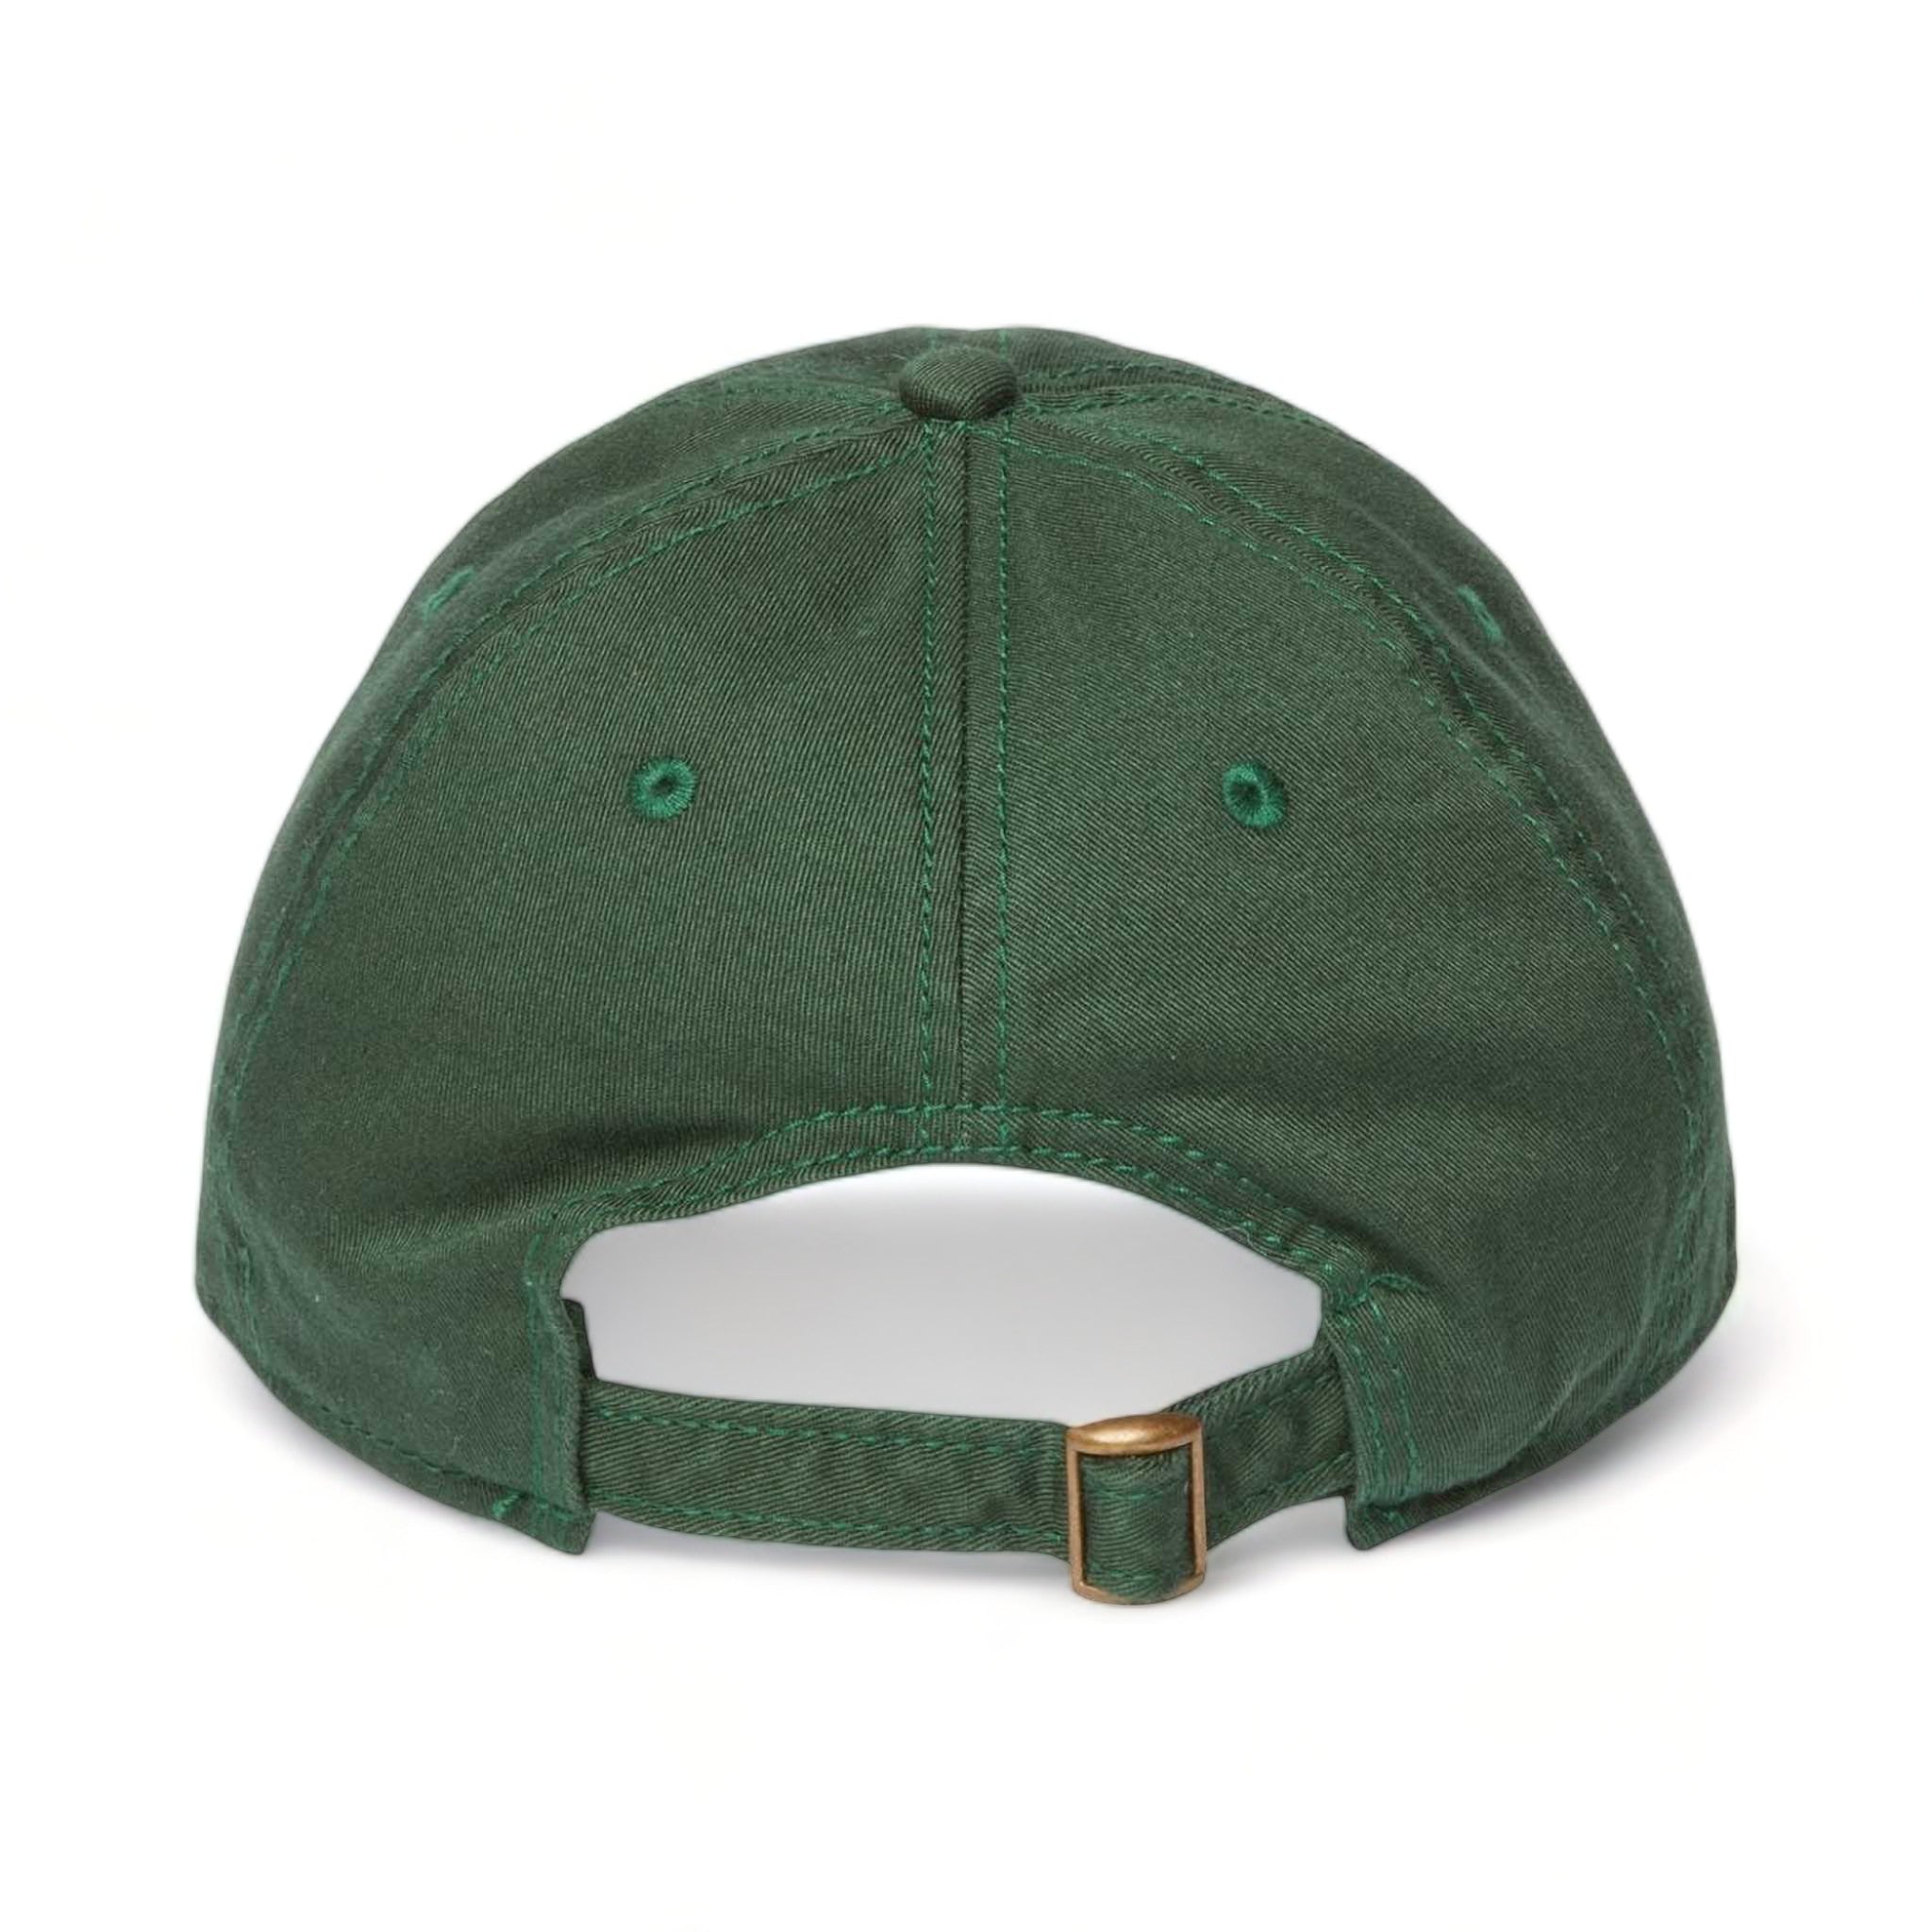 Back view of CAP AMERICA i1002 custom hat in forest green